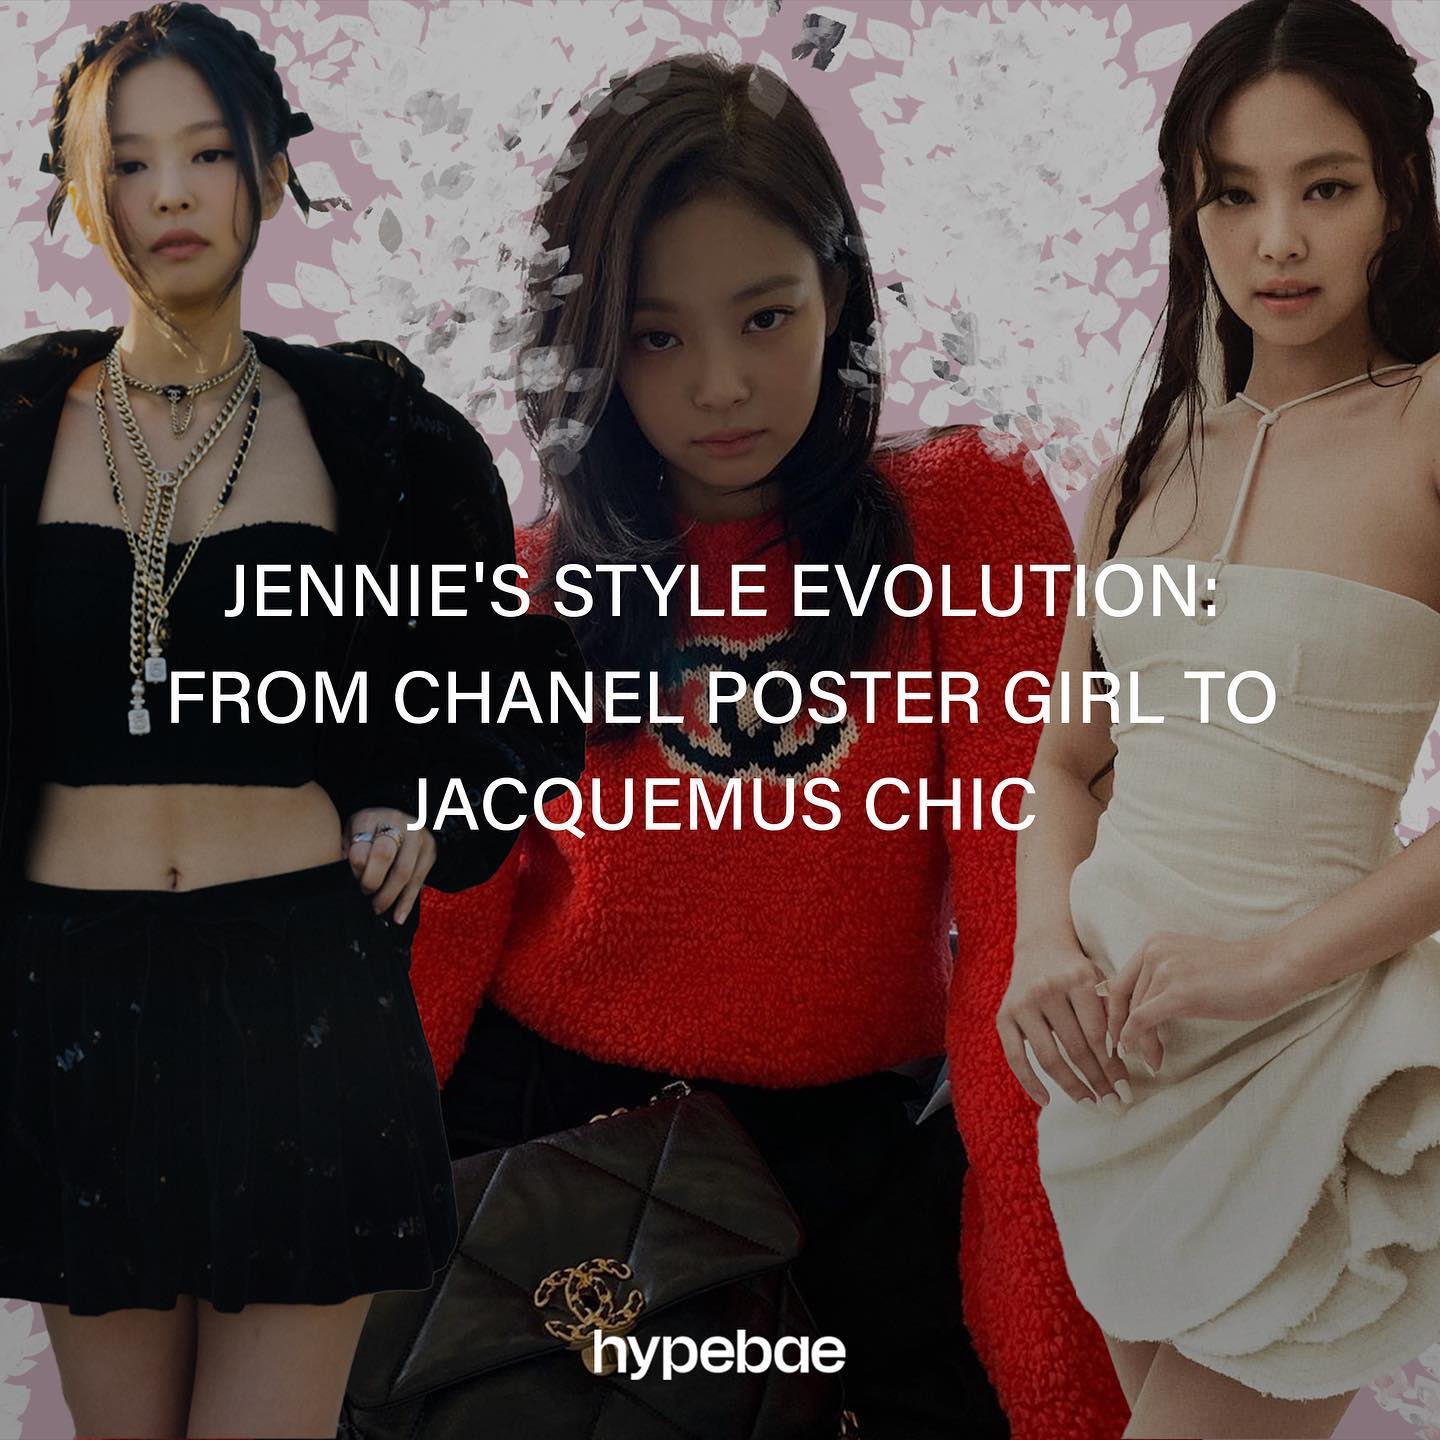 Jennie's Style Evolution: From Chanel Poster Girl to Jacquemus Chic